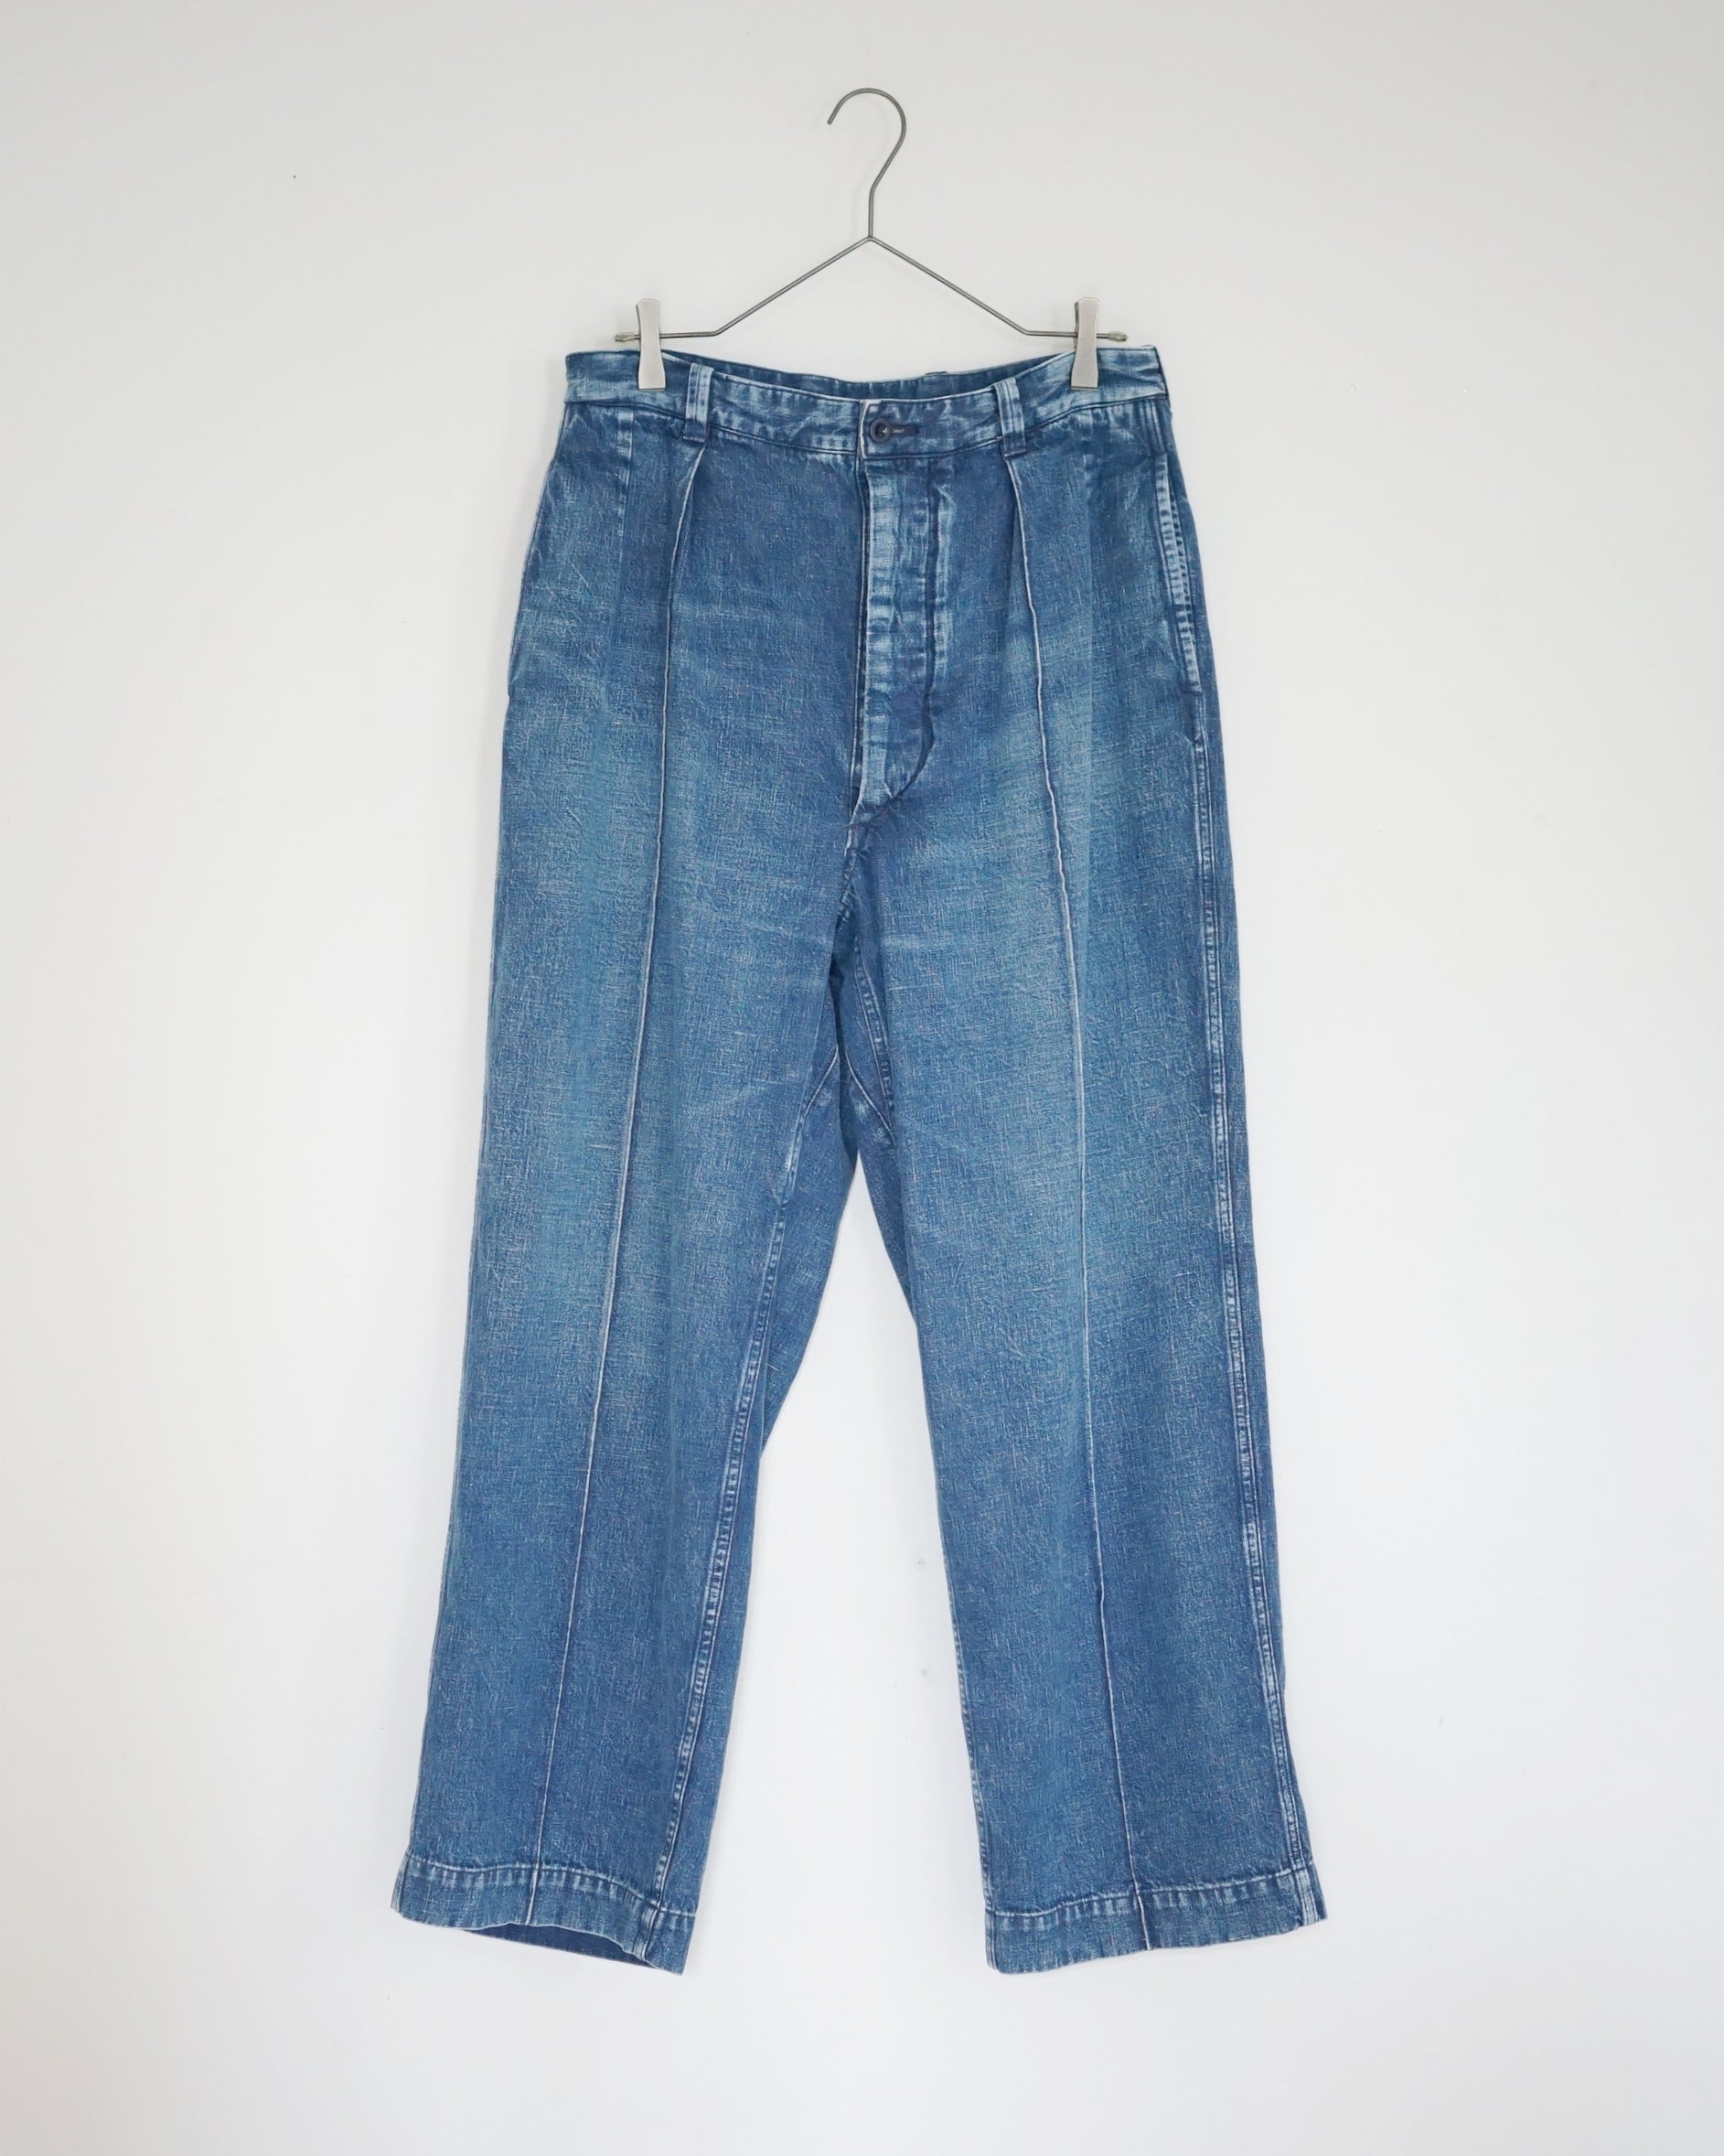 ulterior / NEPPED OLD DENIM 52 TROUSERS 